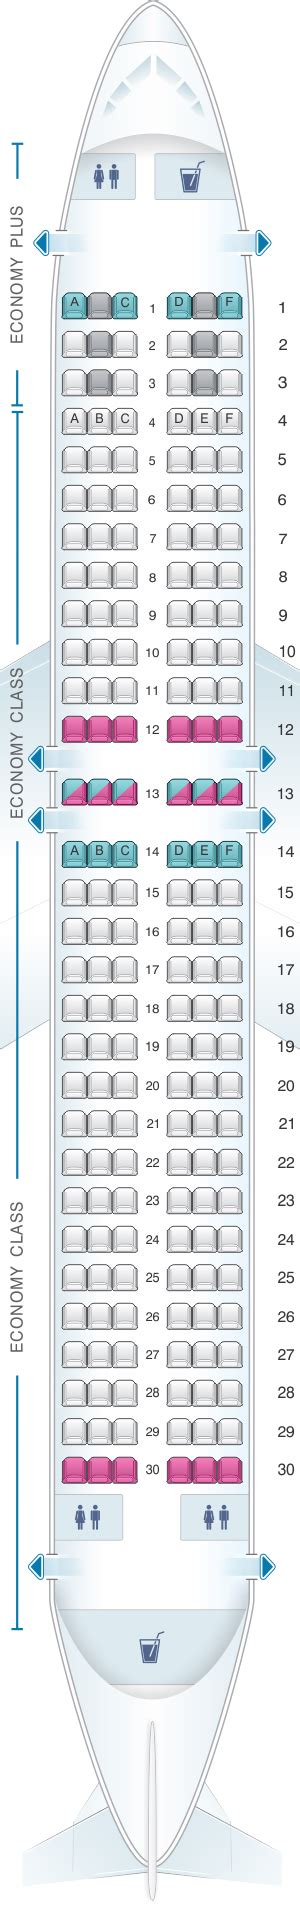 Boeing 737 Max8 Seating Chart